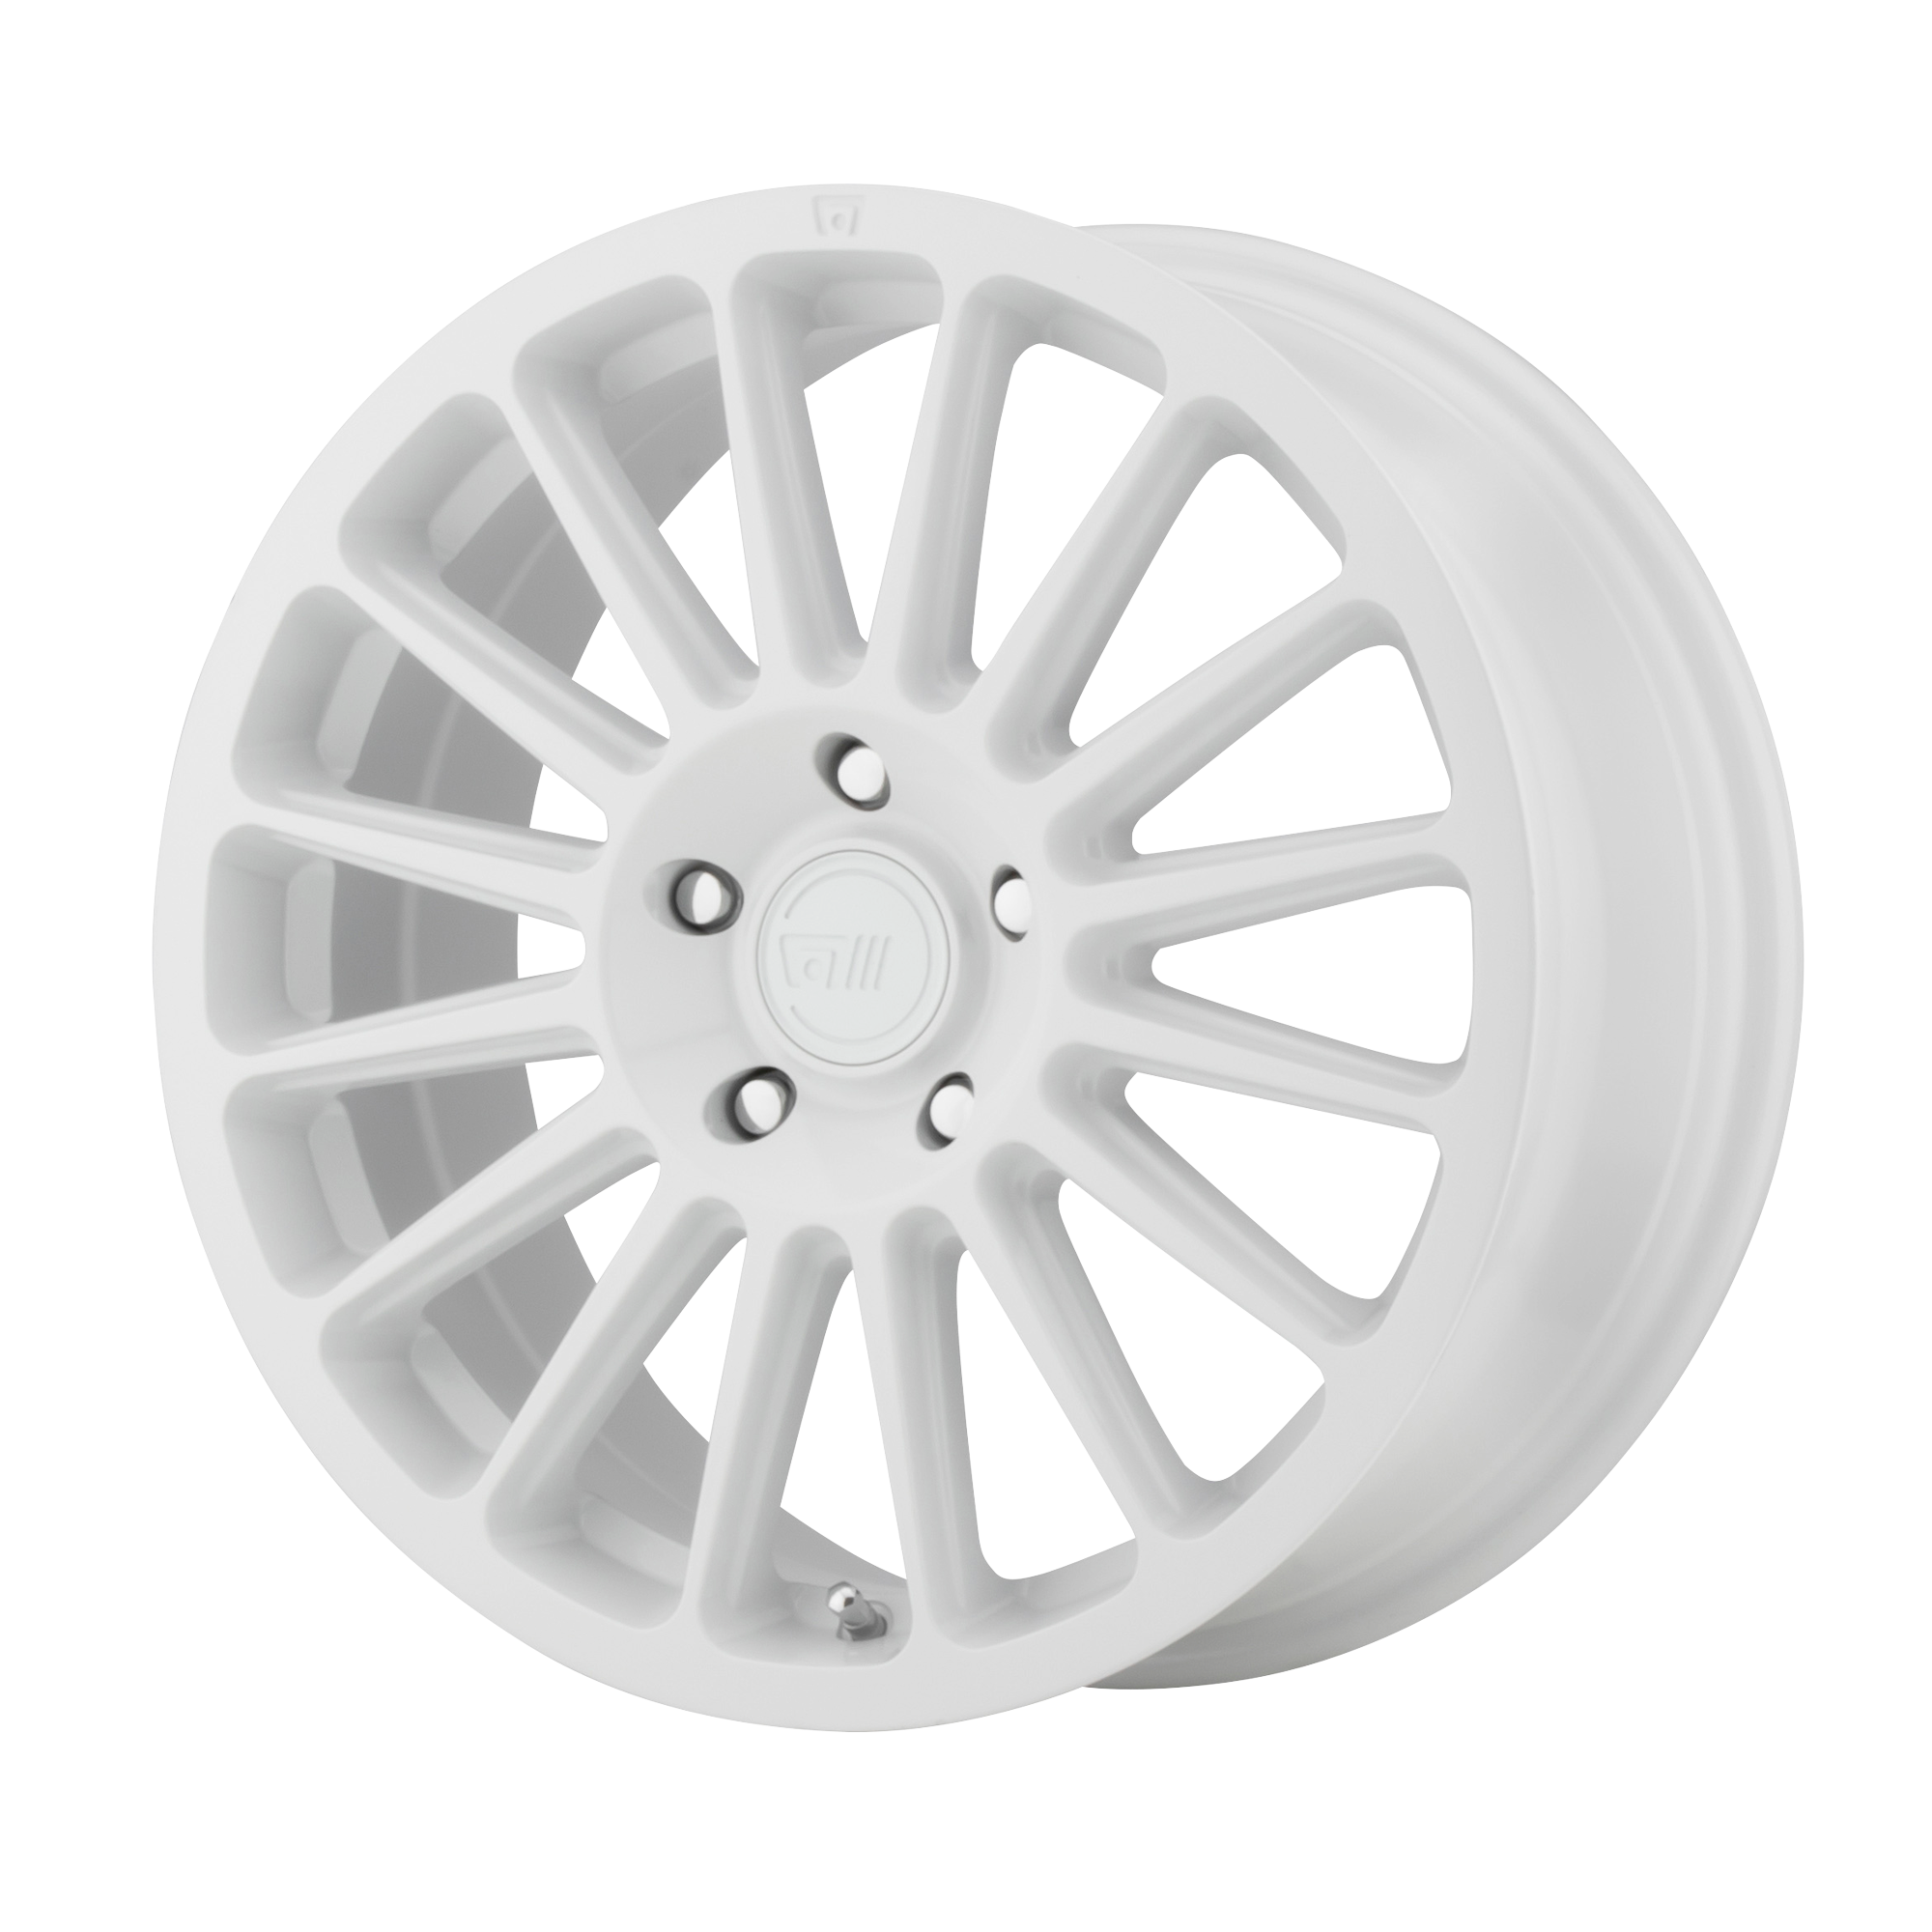 MR141 15x7 5x100.00 WHITE (15 mm) - Tires and Engine Performance